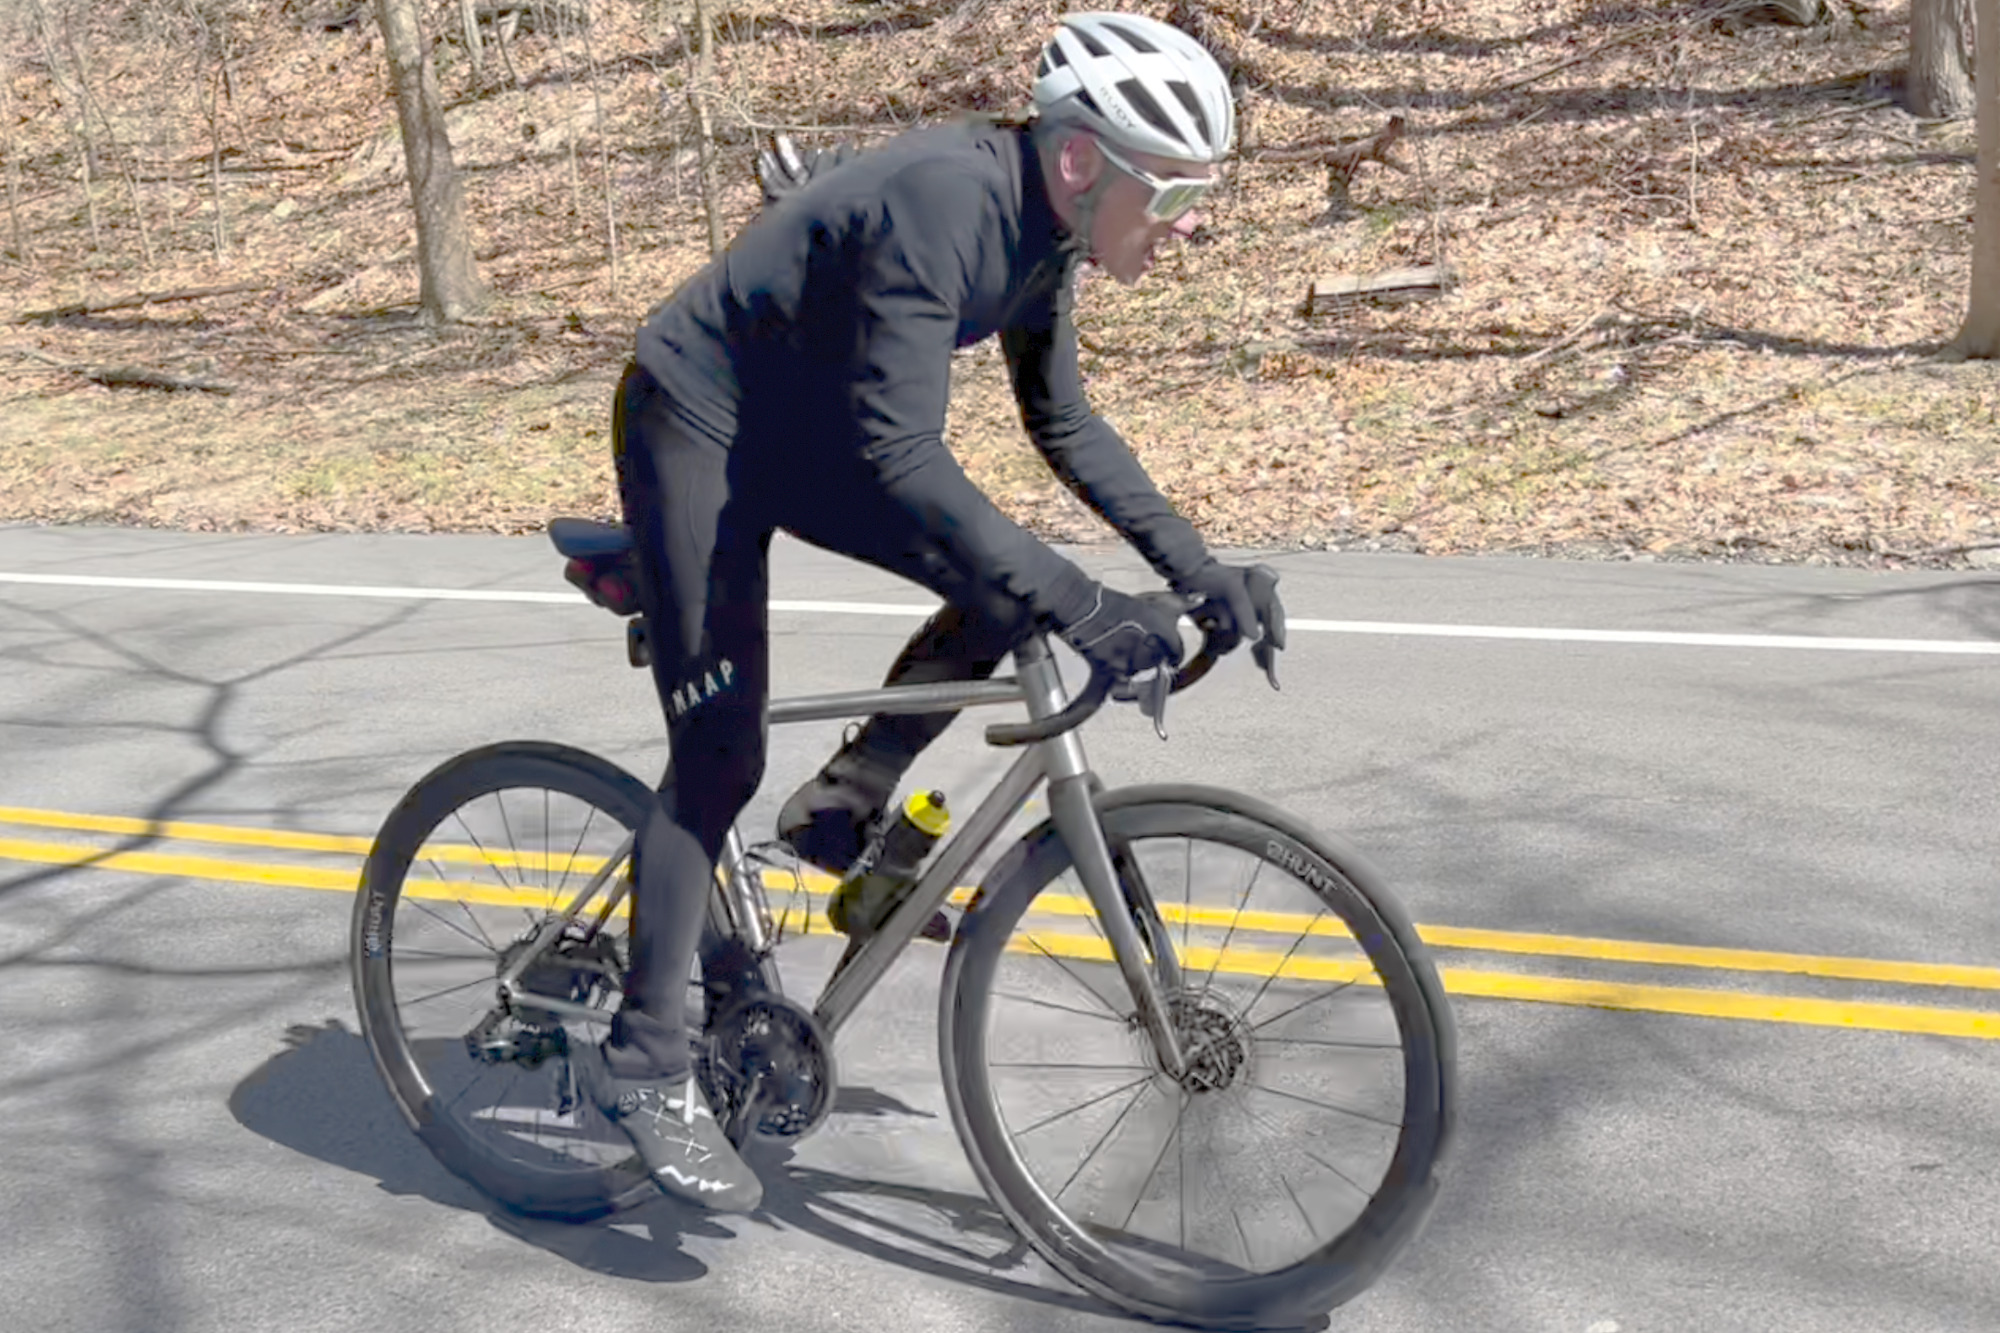 Blackheart Bike Co's Road Ti reviewed:  The Blackheard Road Ti responds quickly and offers a firm, stable, and supportive feel when climbing out-of-the-saddle.